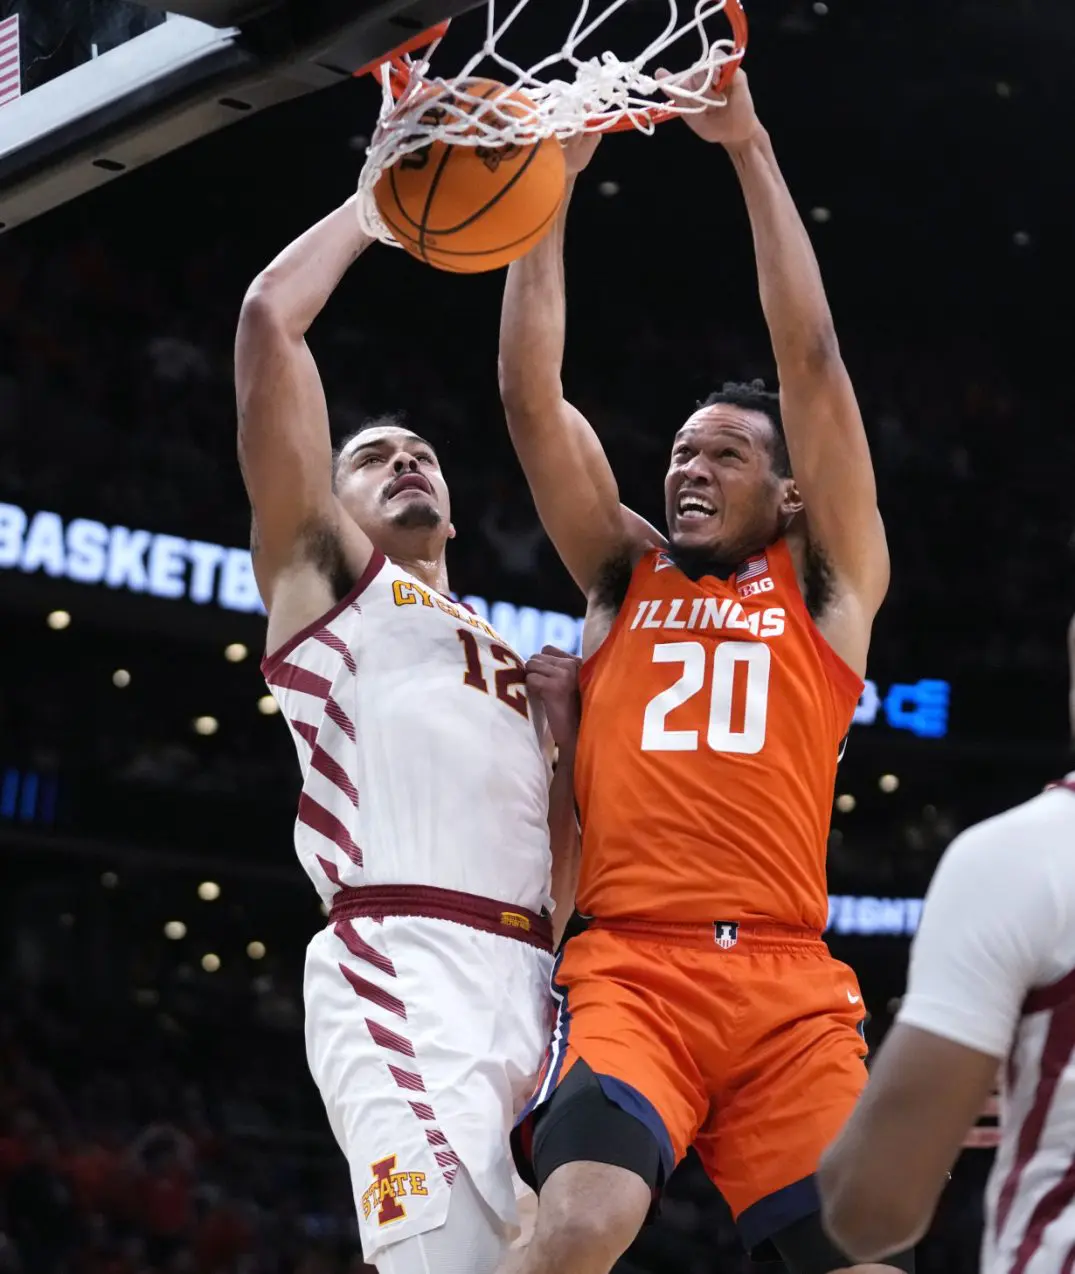 LA Post: Terrence Shannon Jr. leads Illinois past Iowa State 72-69 for first Elite Eight trip since 2005